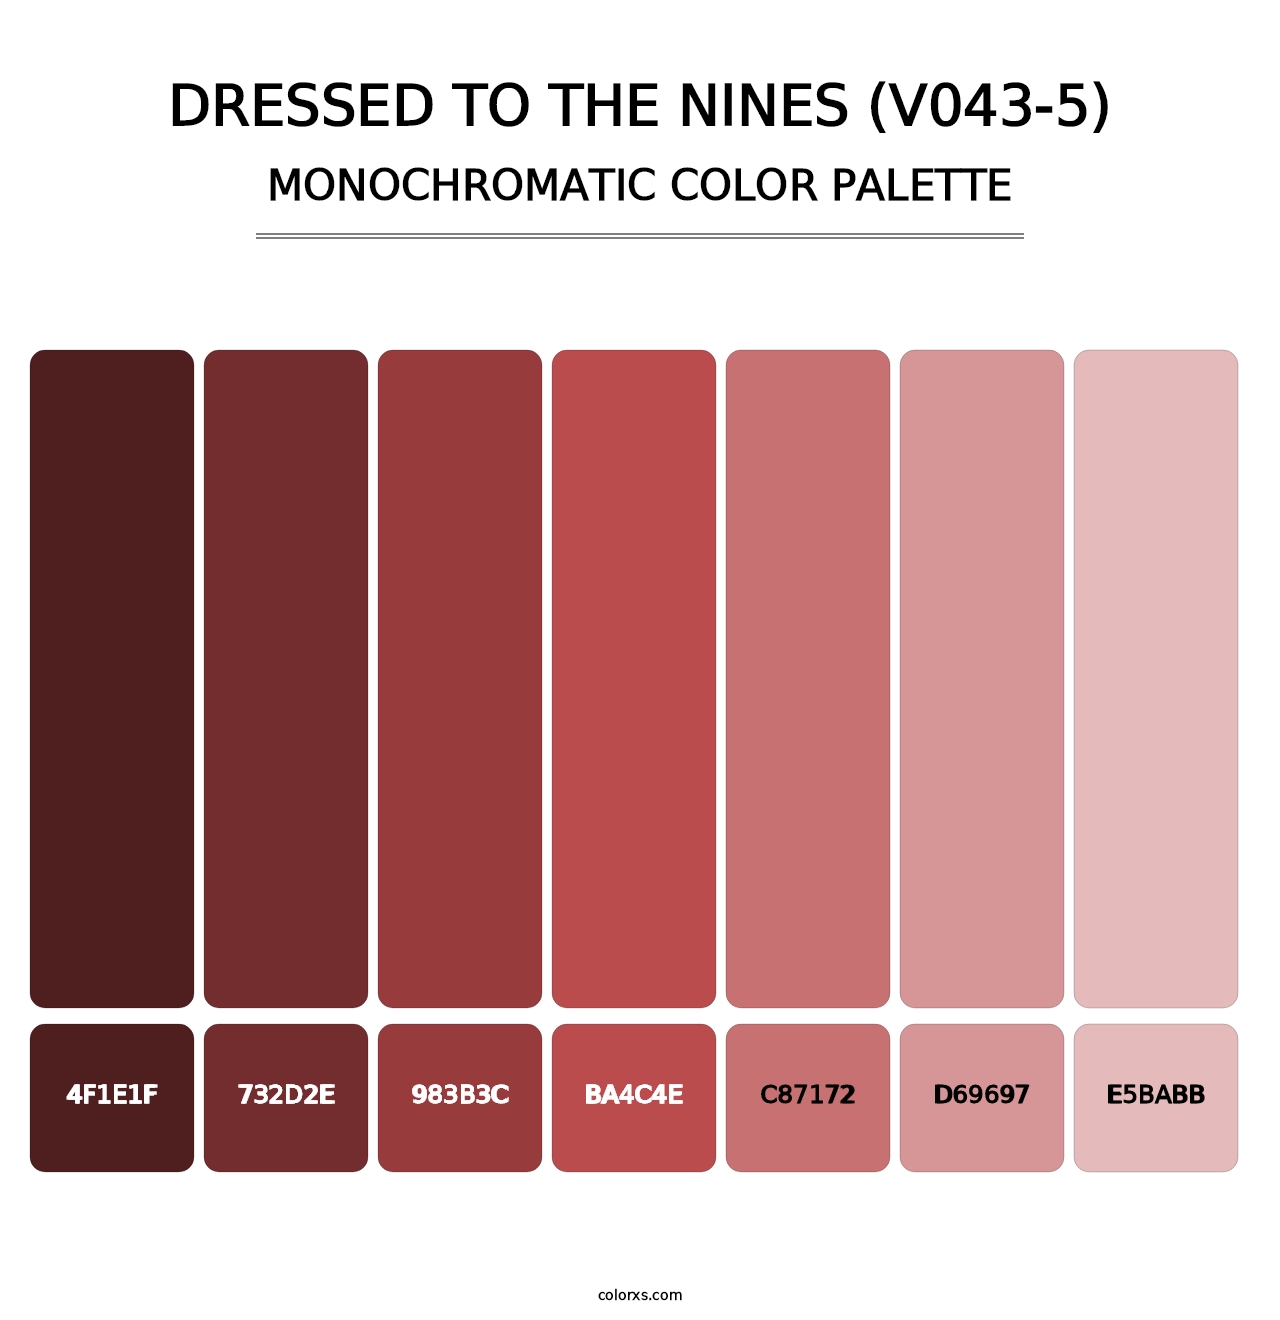 Dressed to the Nines (V043-5) - Monochromatic Color Palette